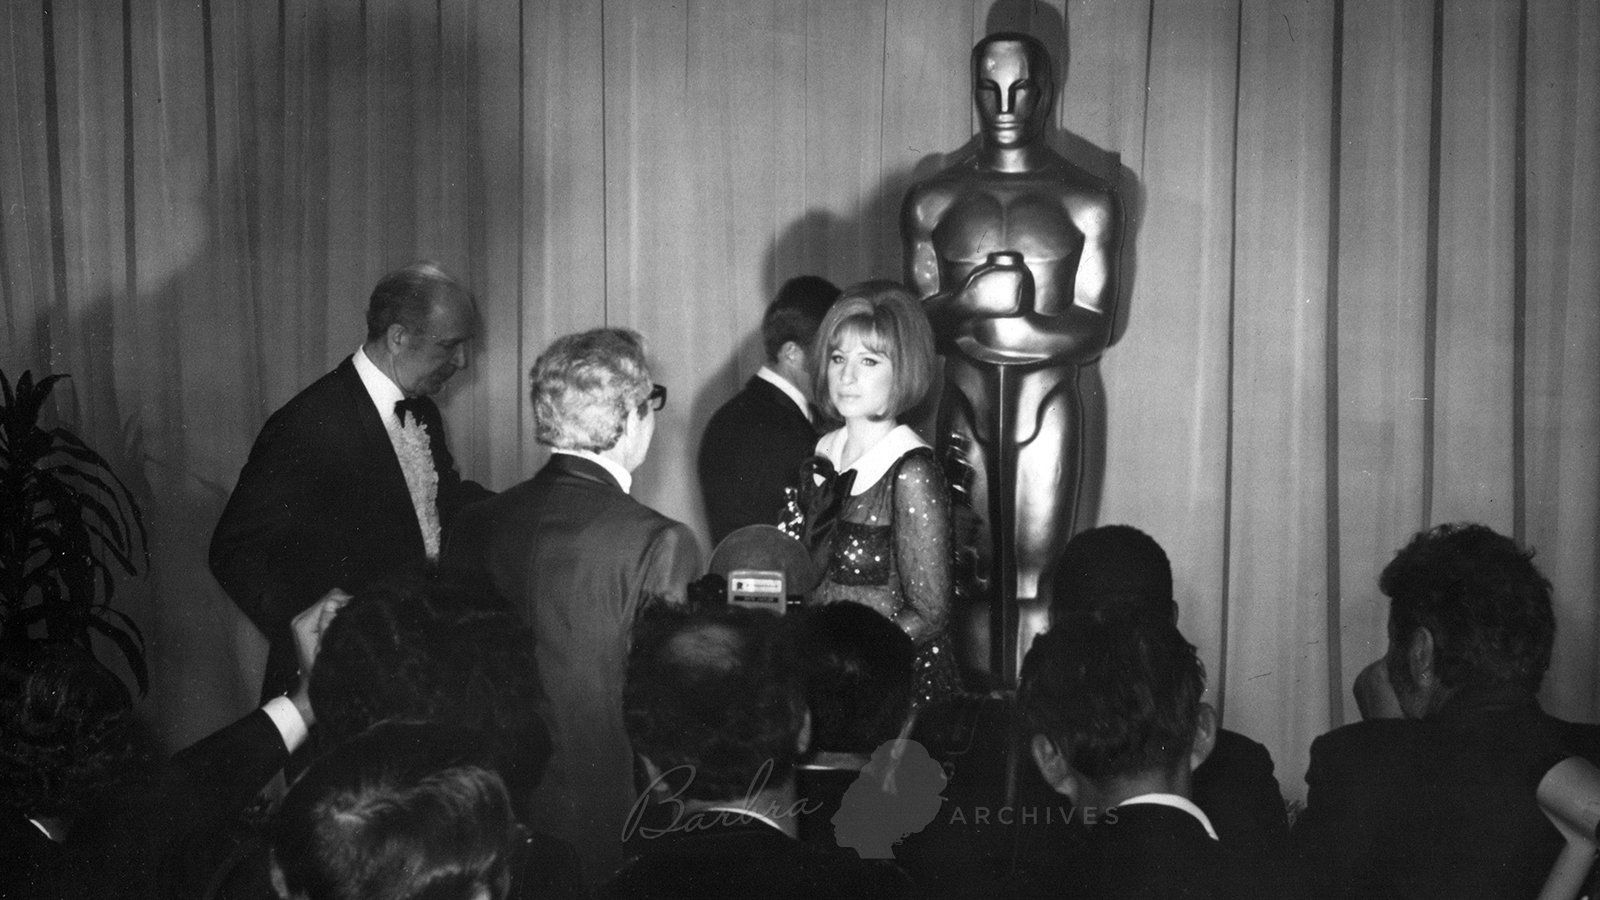 Streisand in the press room, after winning the Oscar in 1969.